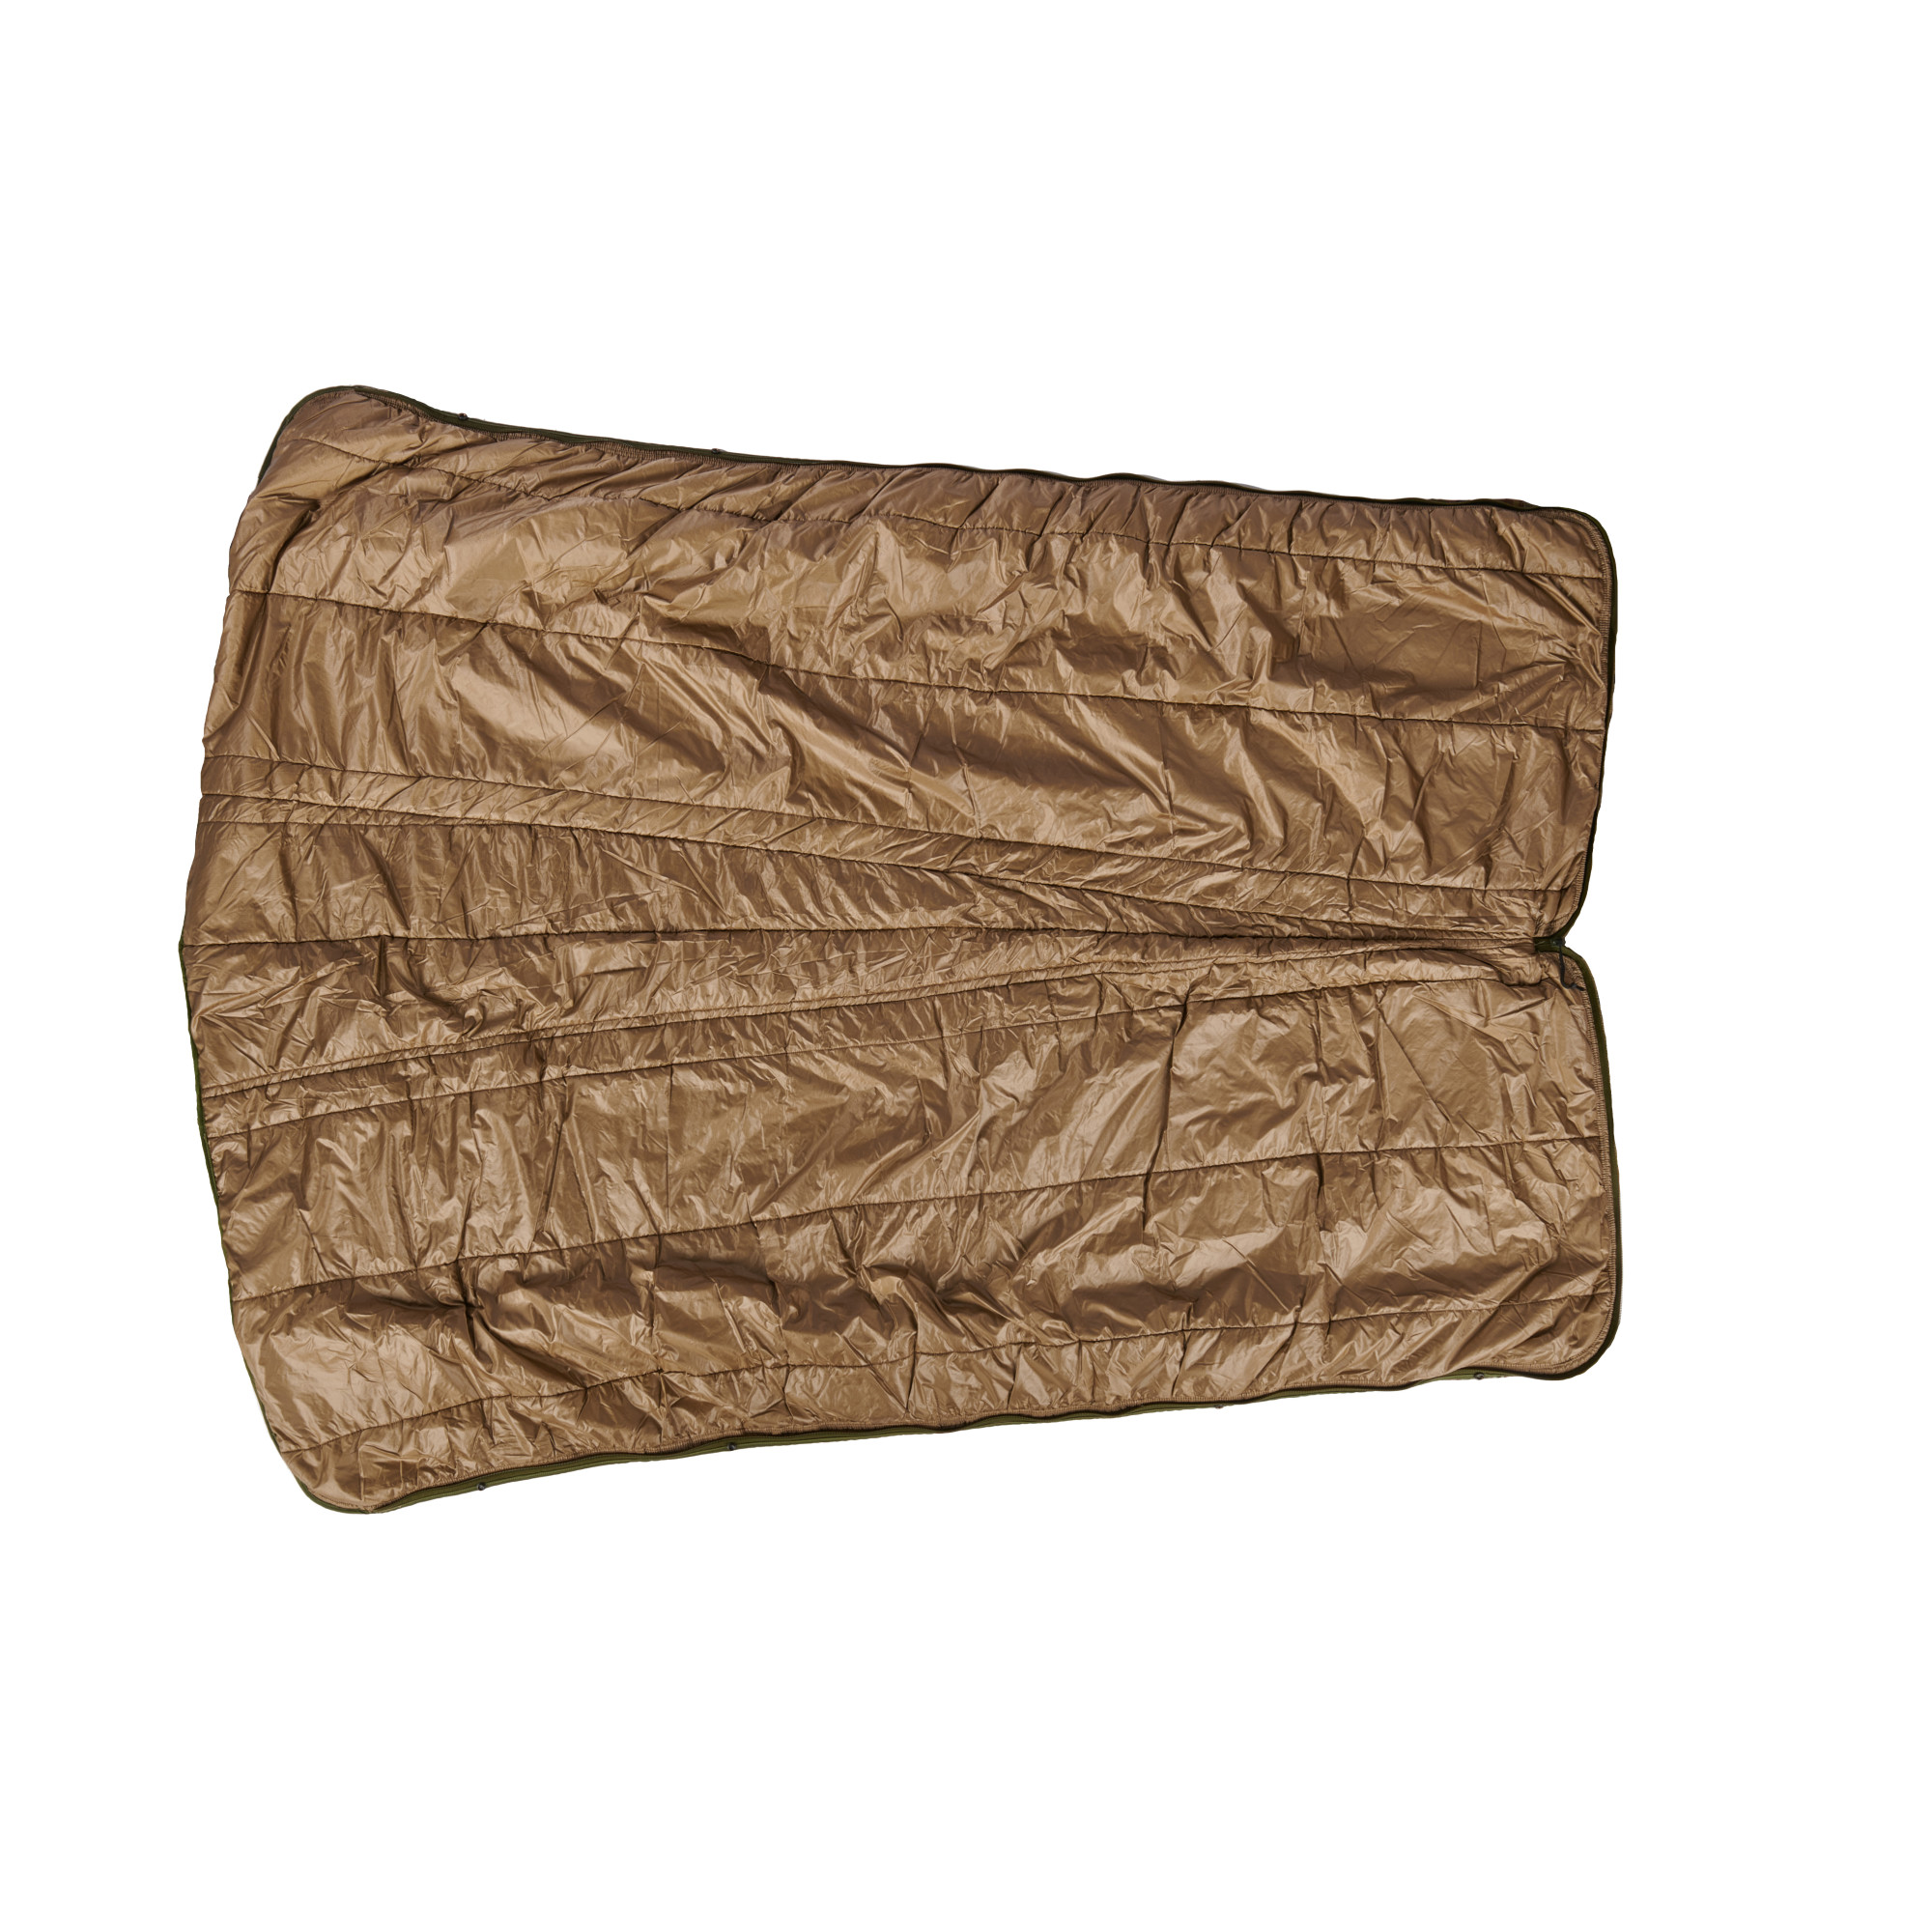 Kelty Tactical Survival Blanket/Litter System, front view, fully unzipped